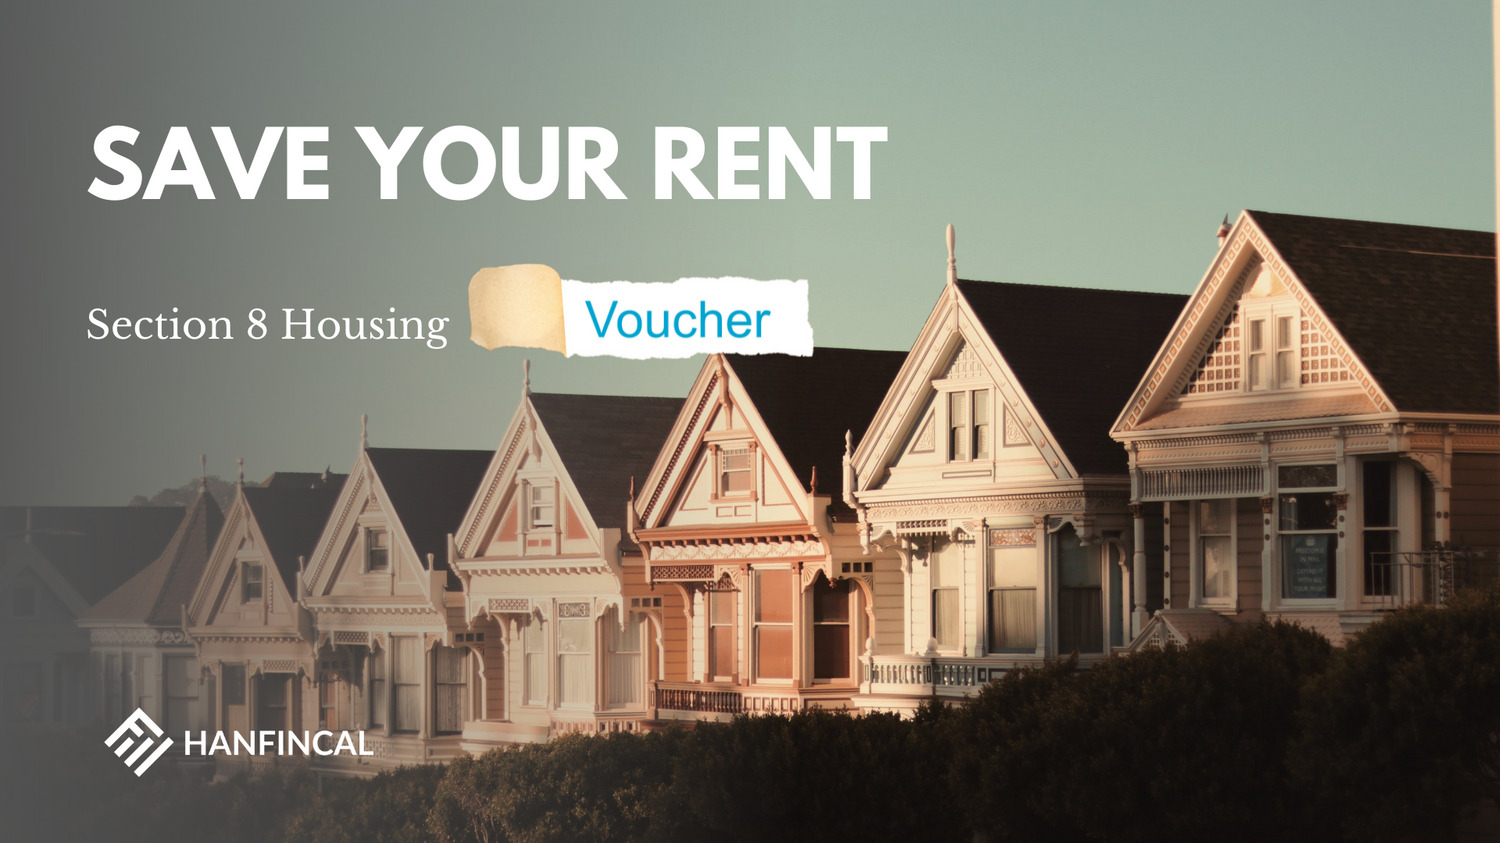 Save your rent - Section 8 Housing Voucher